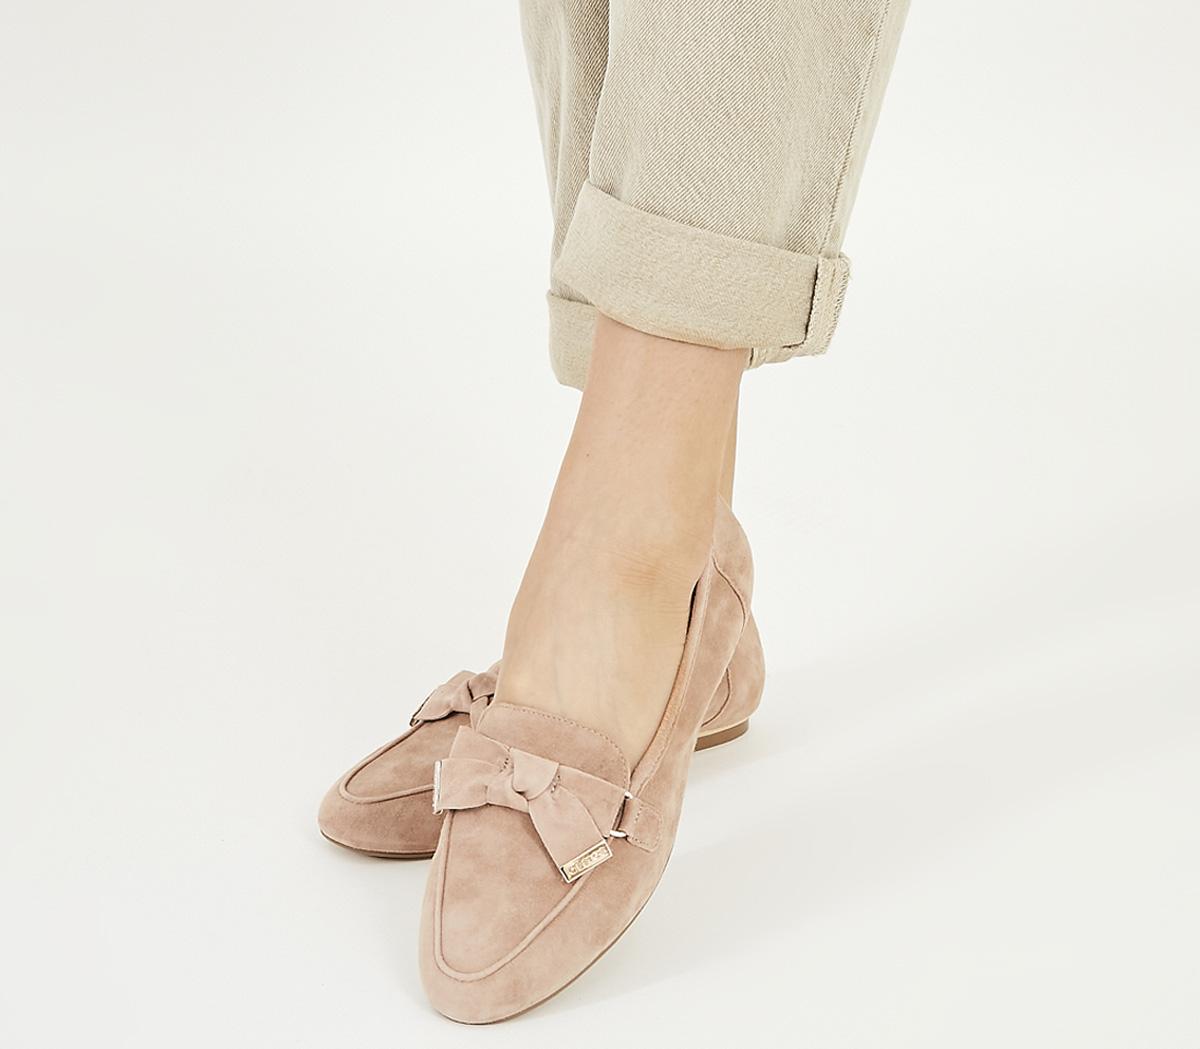 OFFICEFortuna Bow LoafersBlush Suede